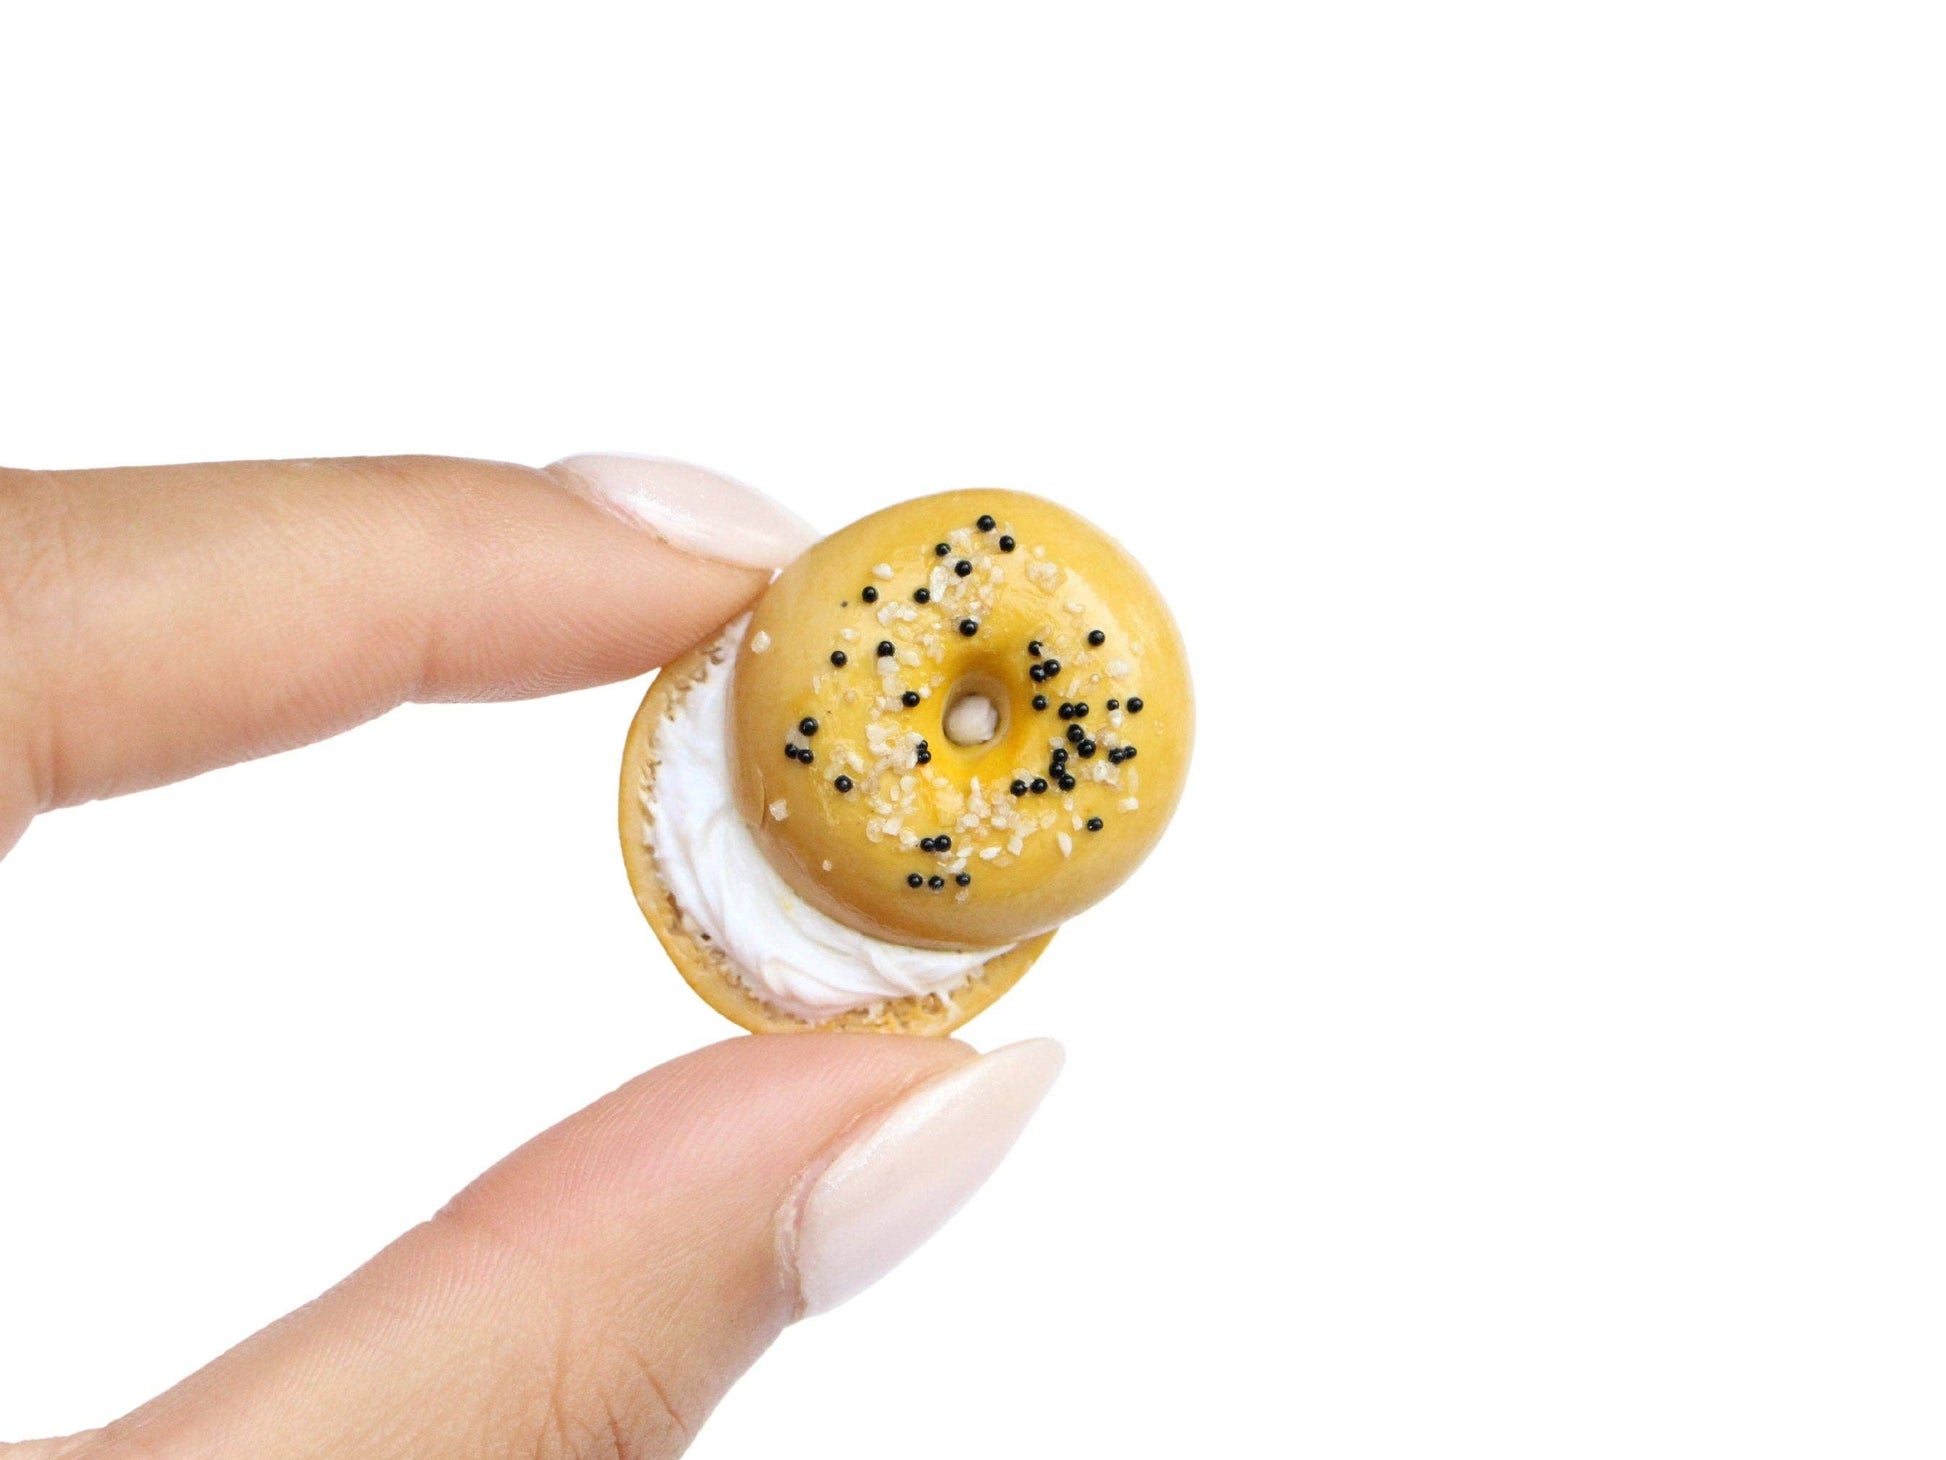 Mini everything bagel magnet. Cut in half with cream cheese schmear.